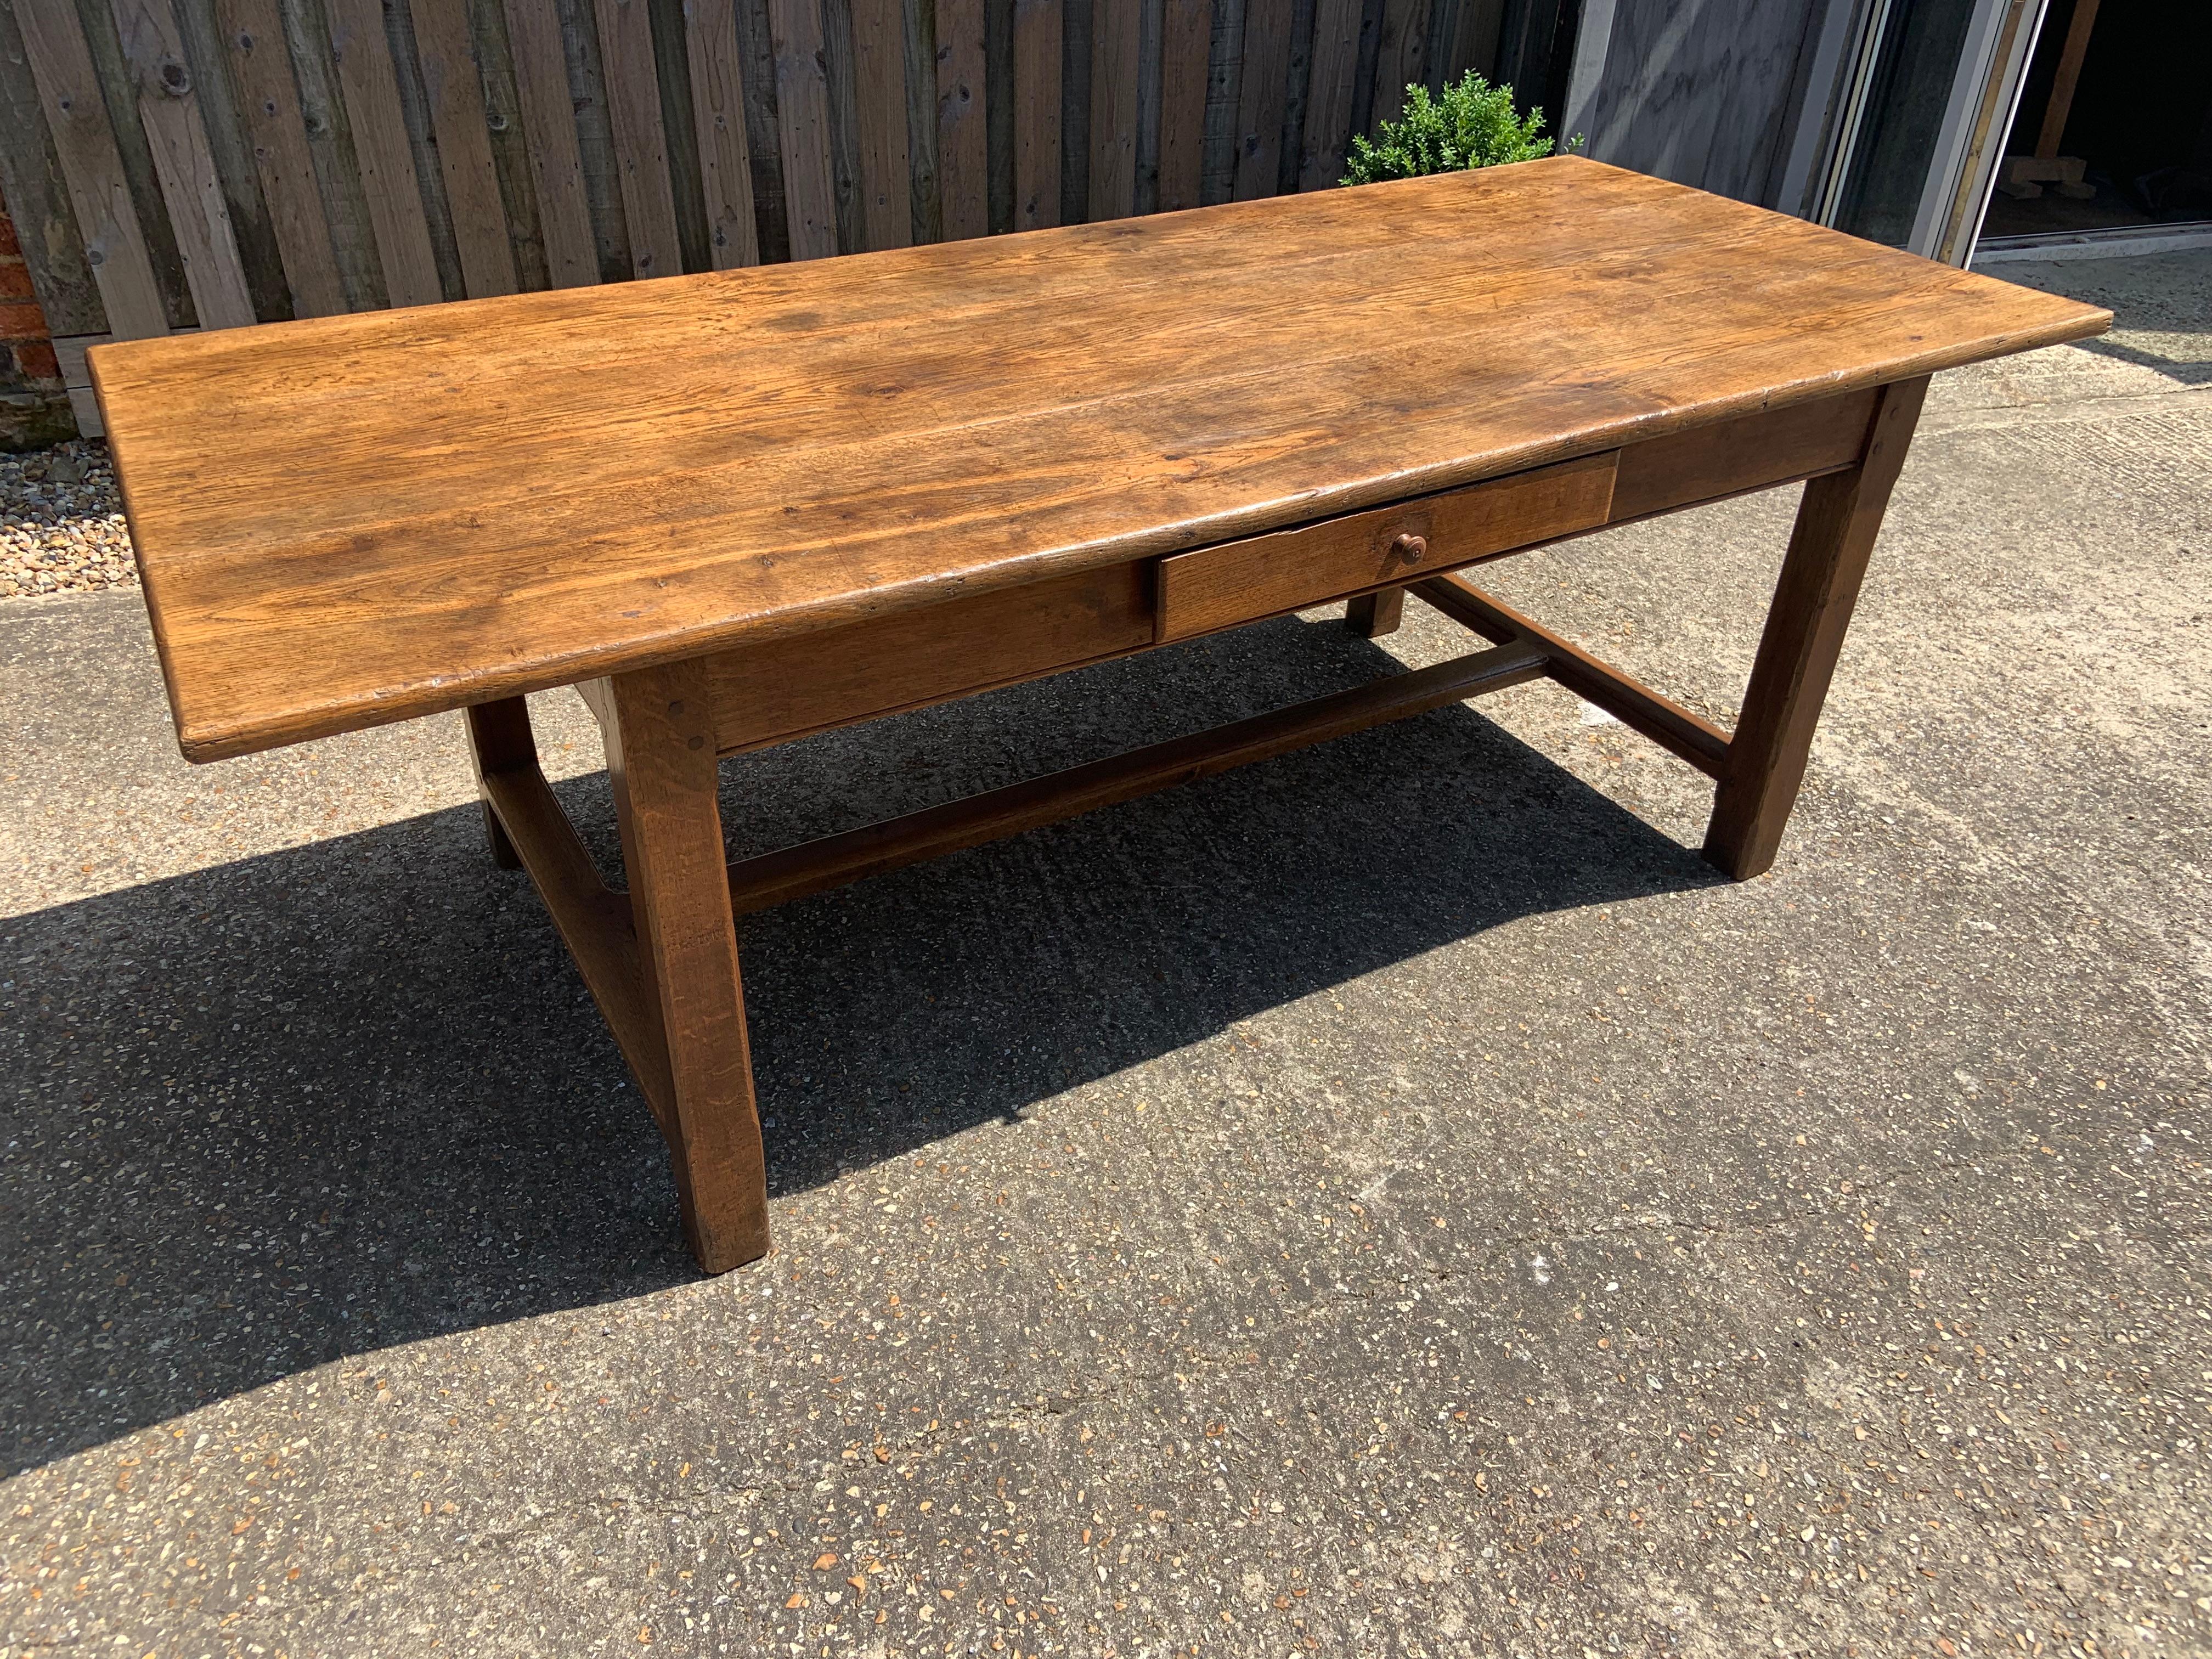 French Provincial Early 19th Century Oak Farmhouse Table